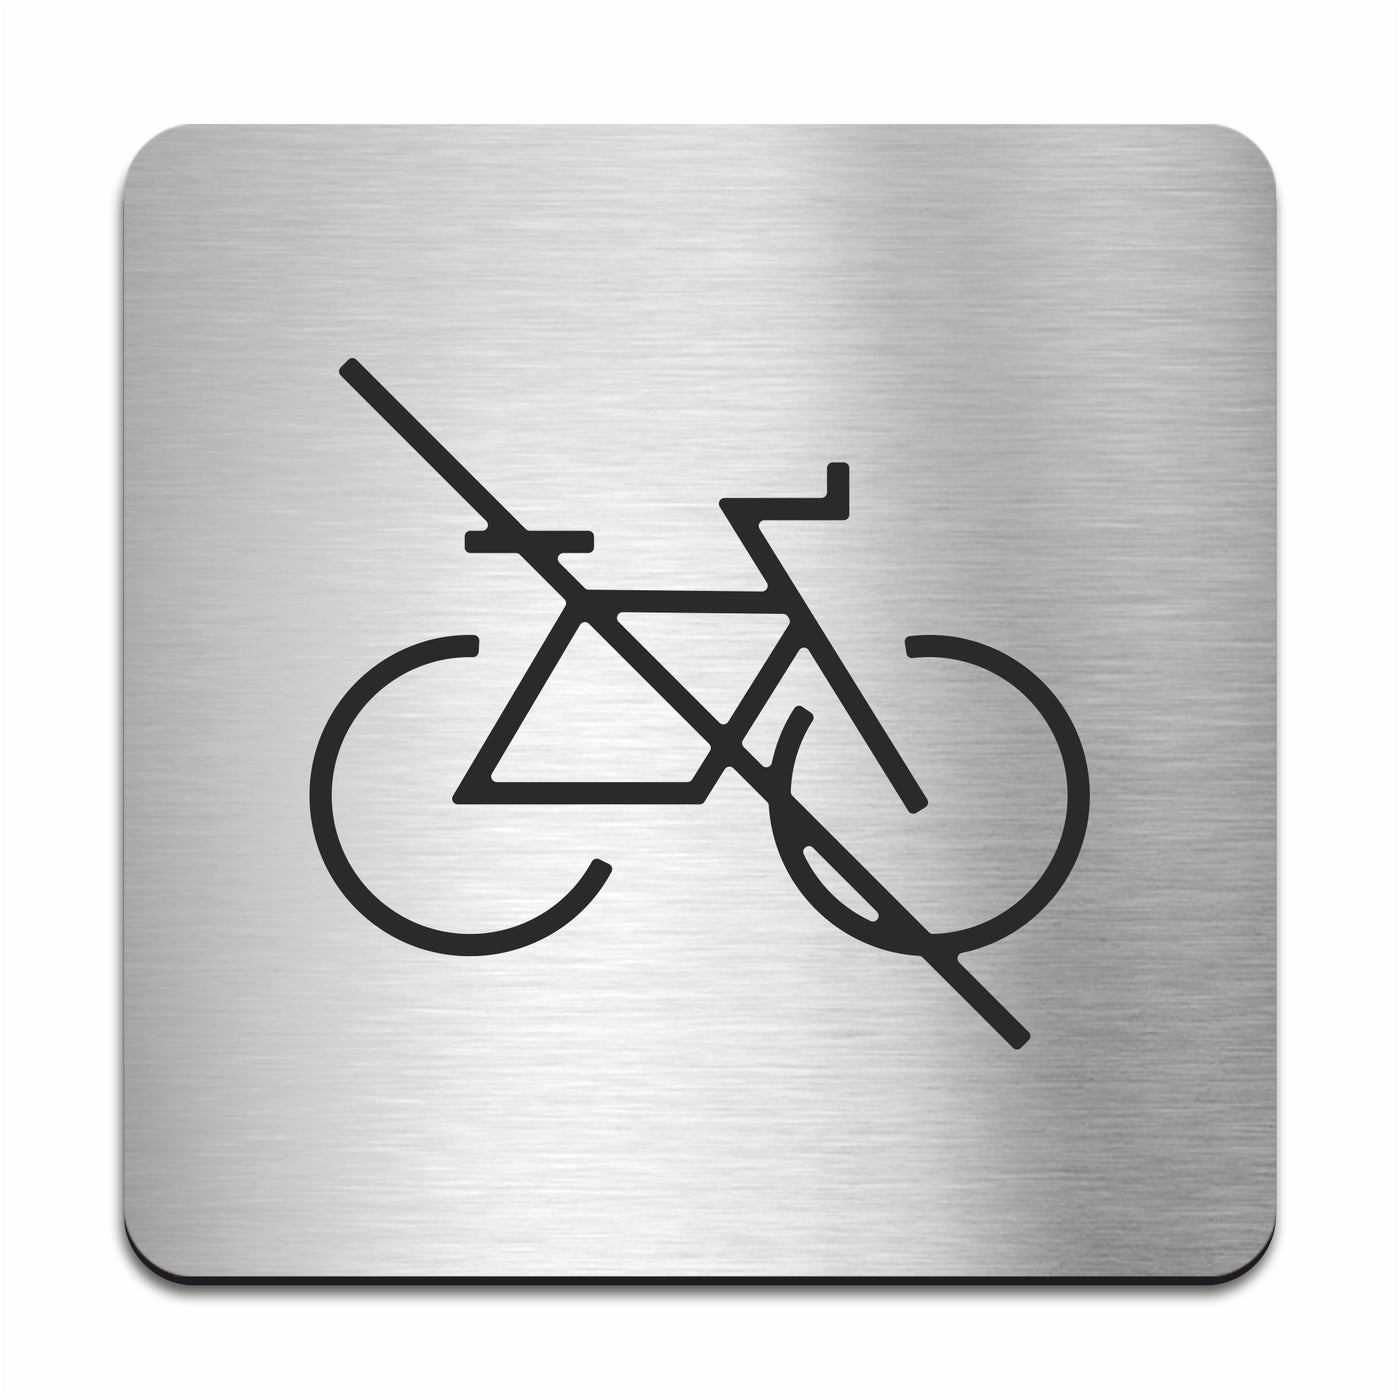 No Bicycles Allowed Sign | No Bike Sign - Stainless steel